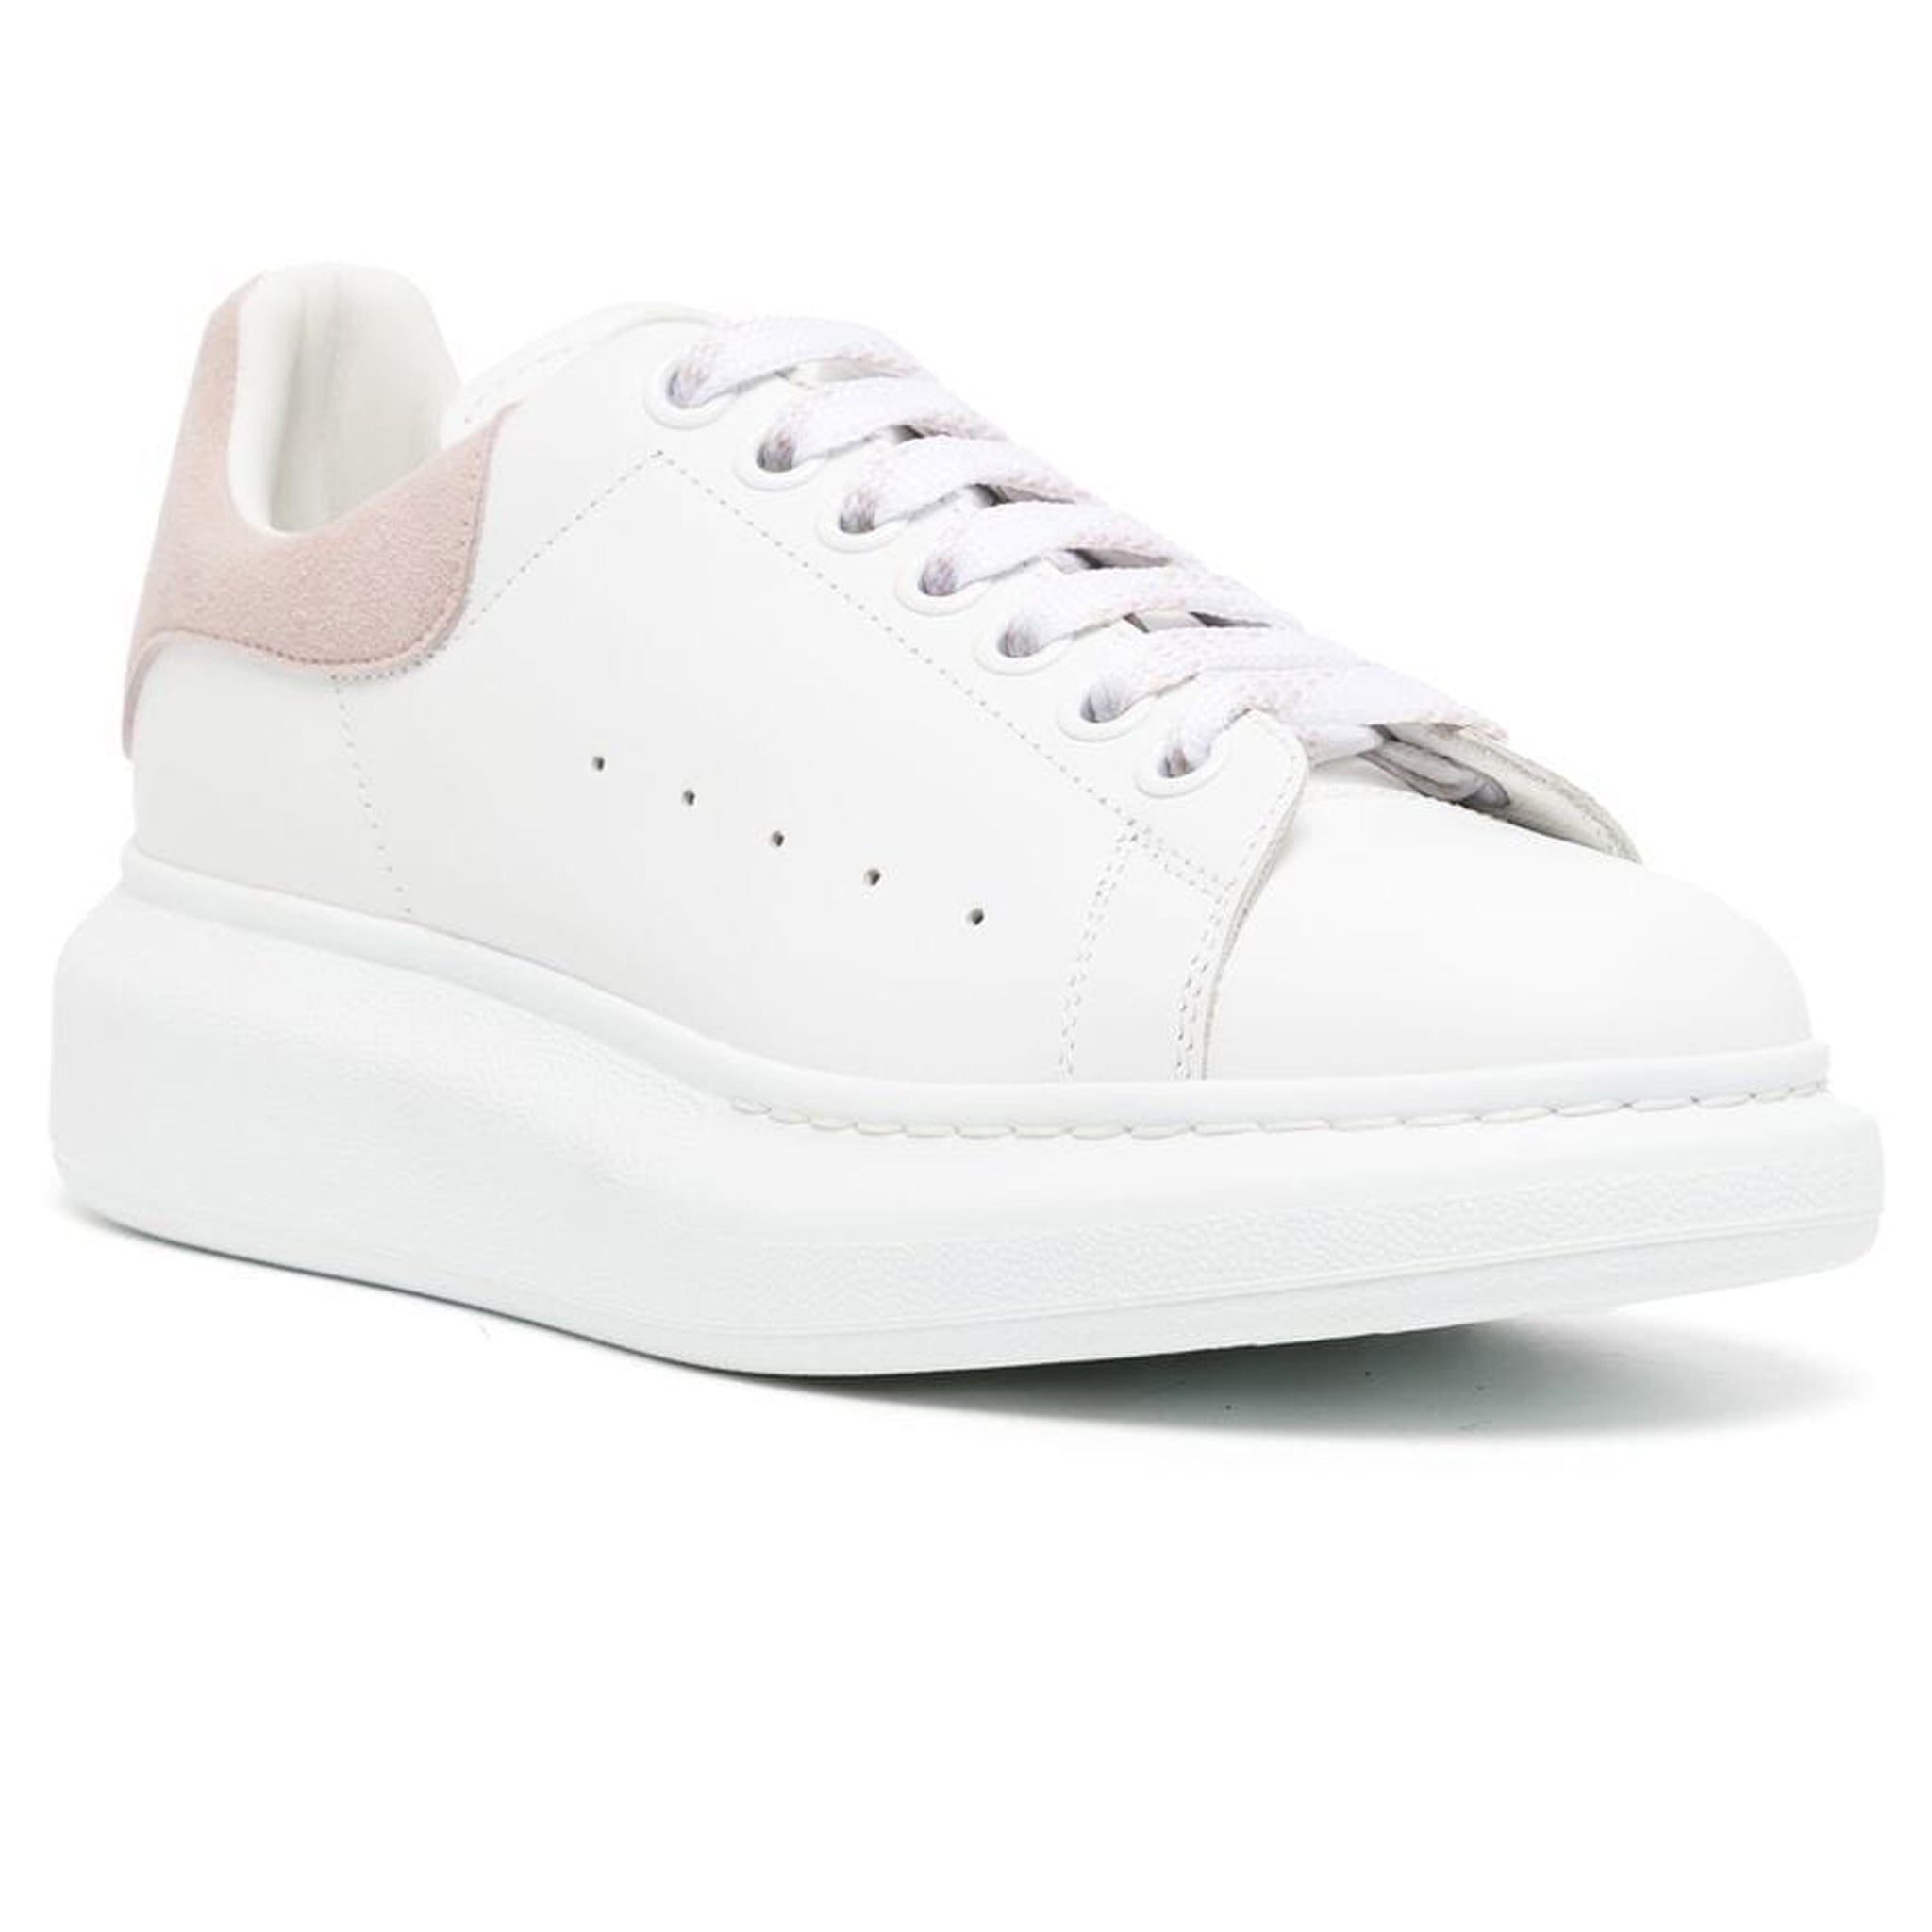 Front side view of Alexander Mcqueen Raised Sole White Pink Sneaker